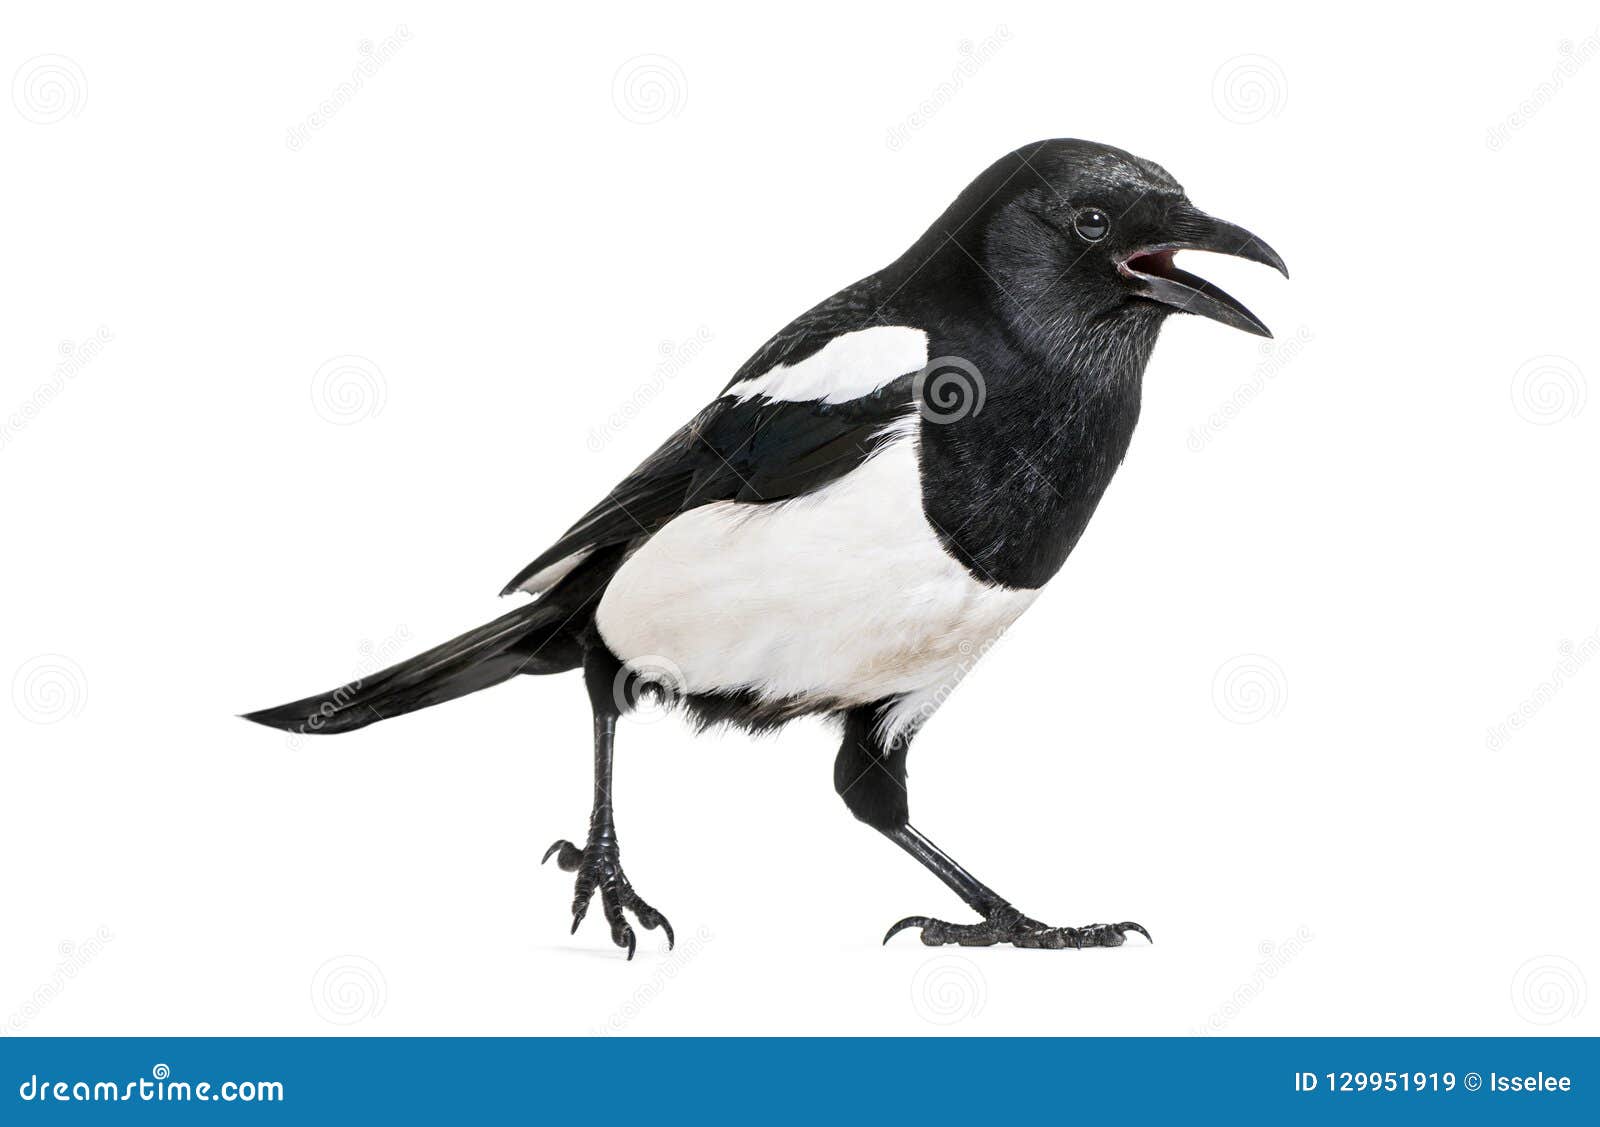 common magpie, pica pica, in front of white background